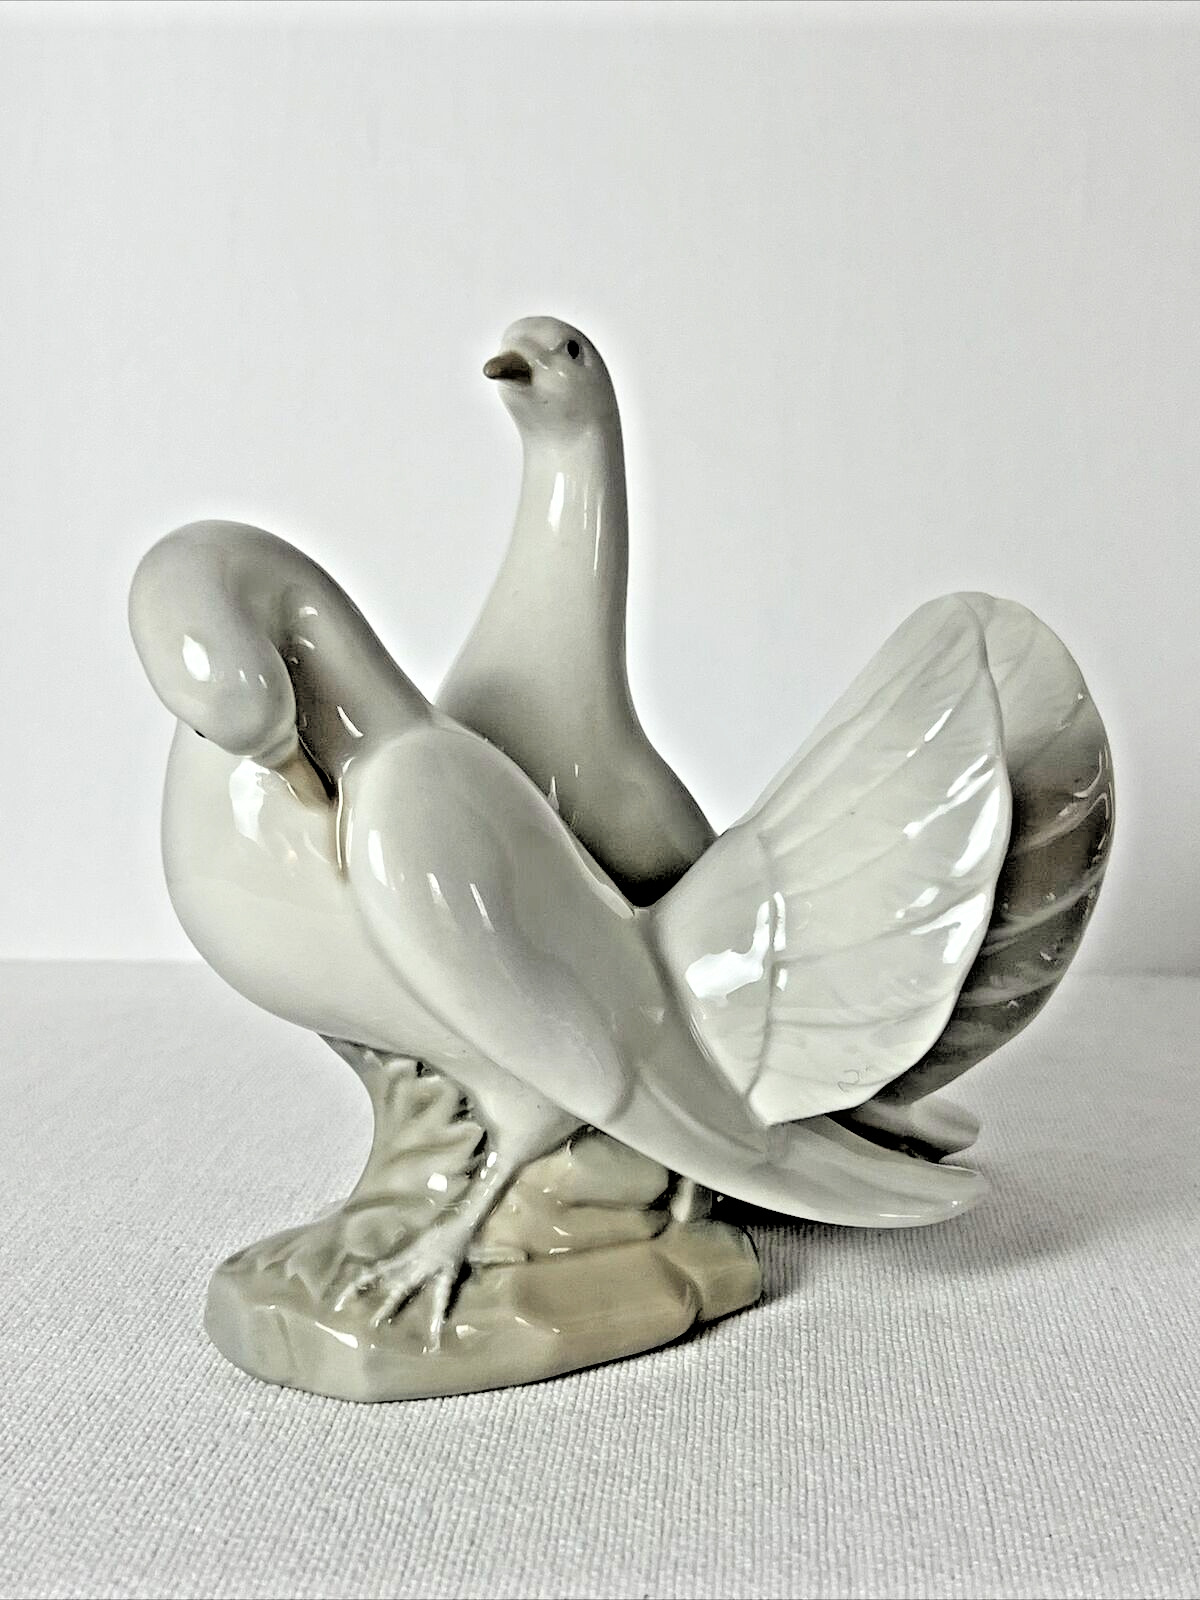 A Pair of Vintage Porceval White Porcelain Doves, Gloss Finish, Made in Spain.